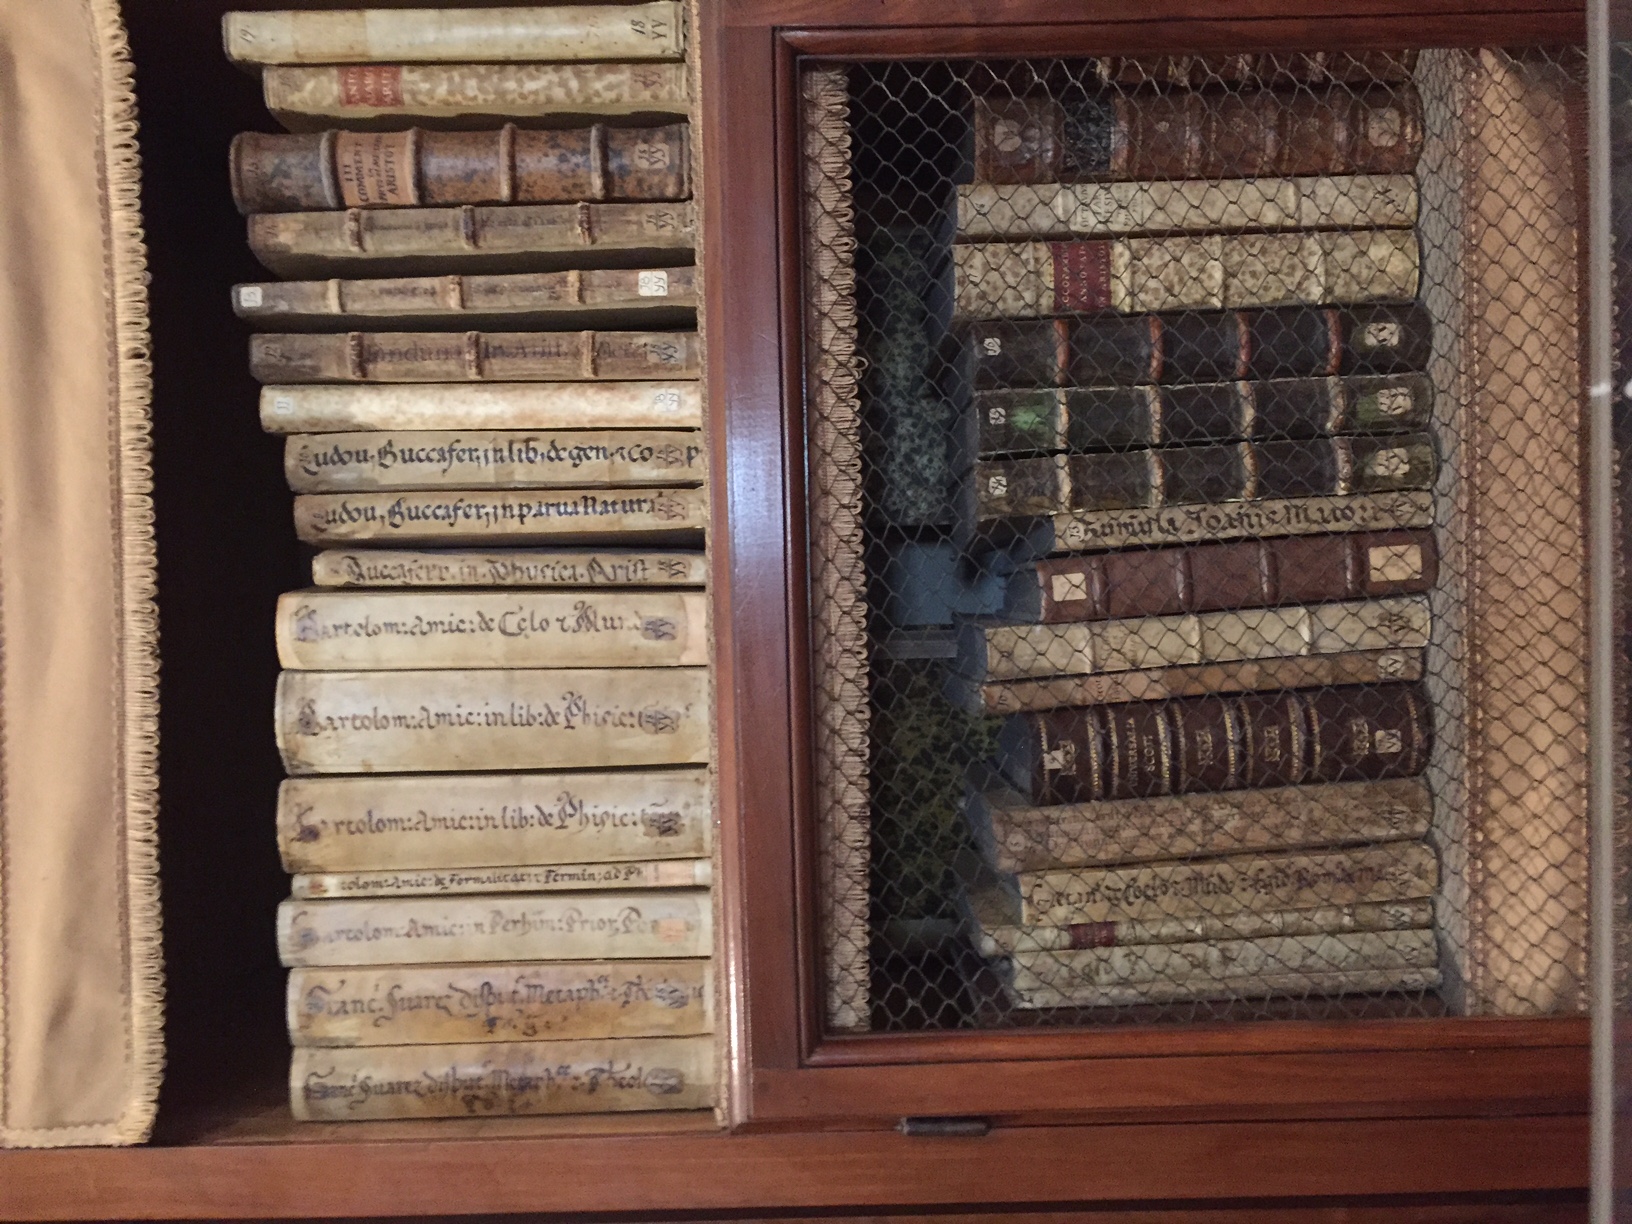 Stash of old books and manuscripts inside a cabinet.